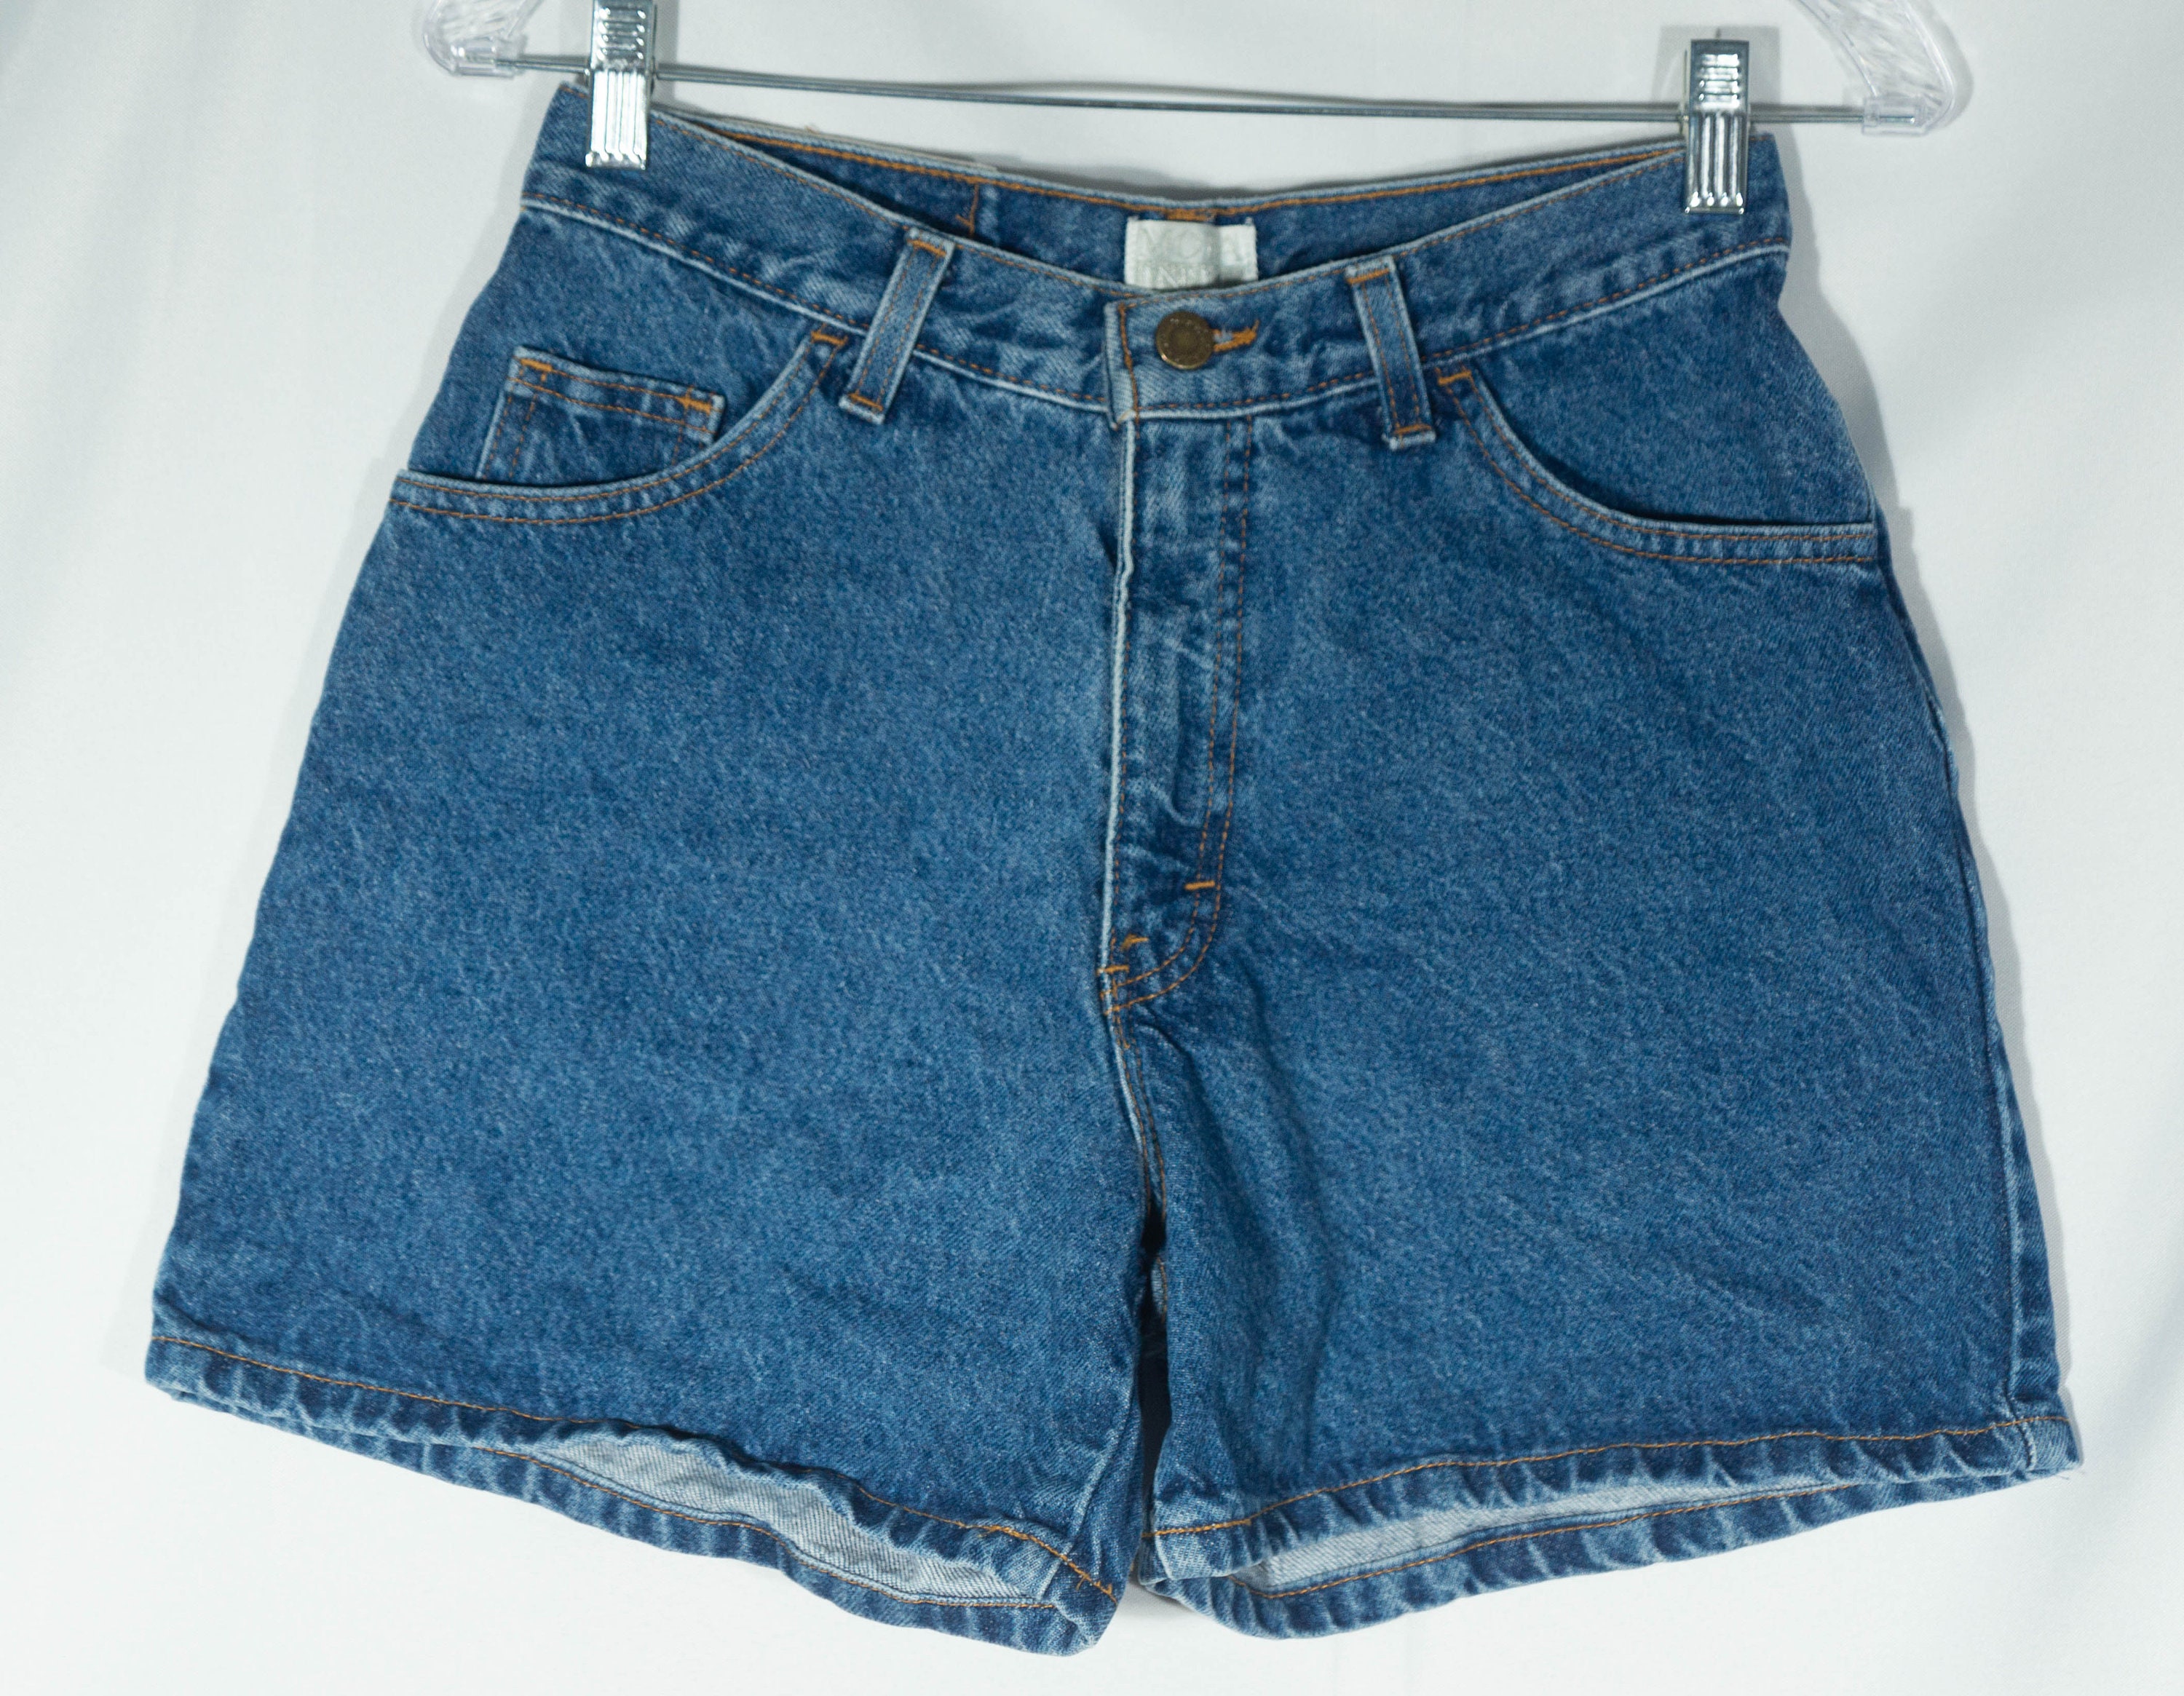 Buy Vintage Jean Shorts Made in USA london Jeans Moda Int'l Label VTG Size  8, 28 High Waist Online in India 